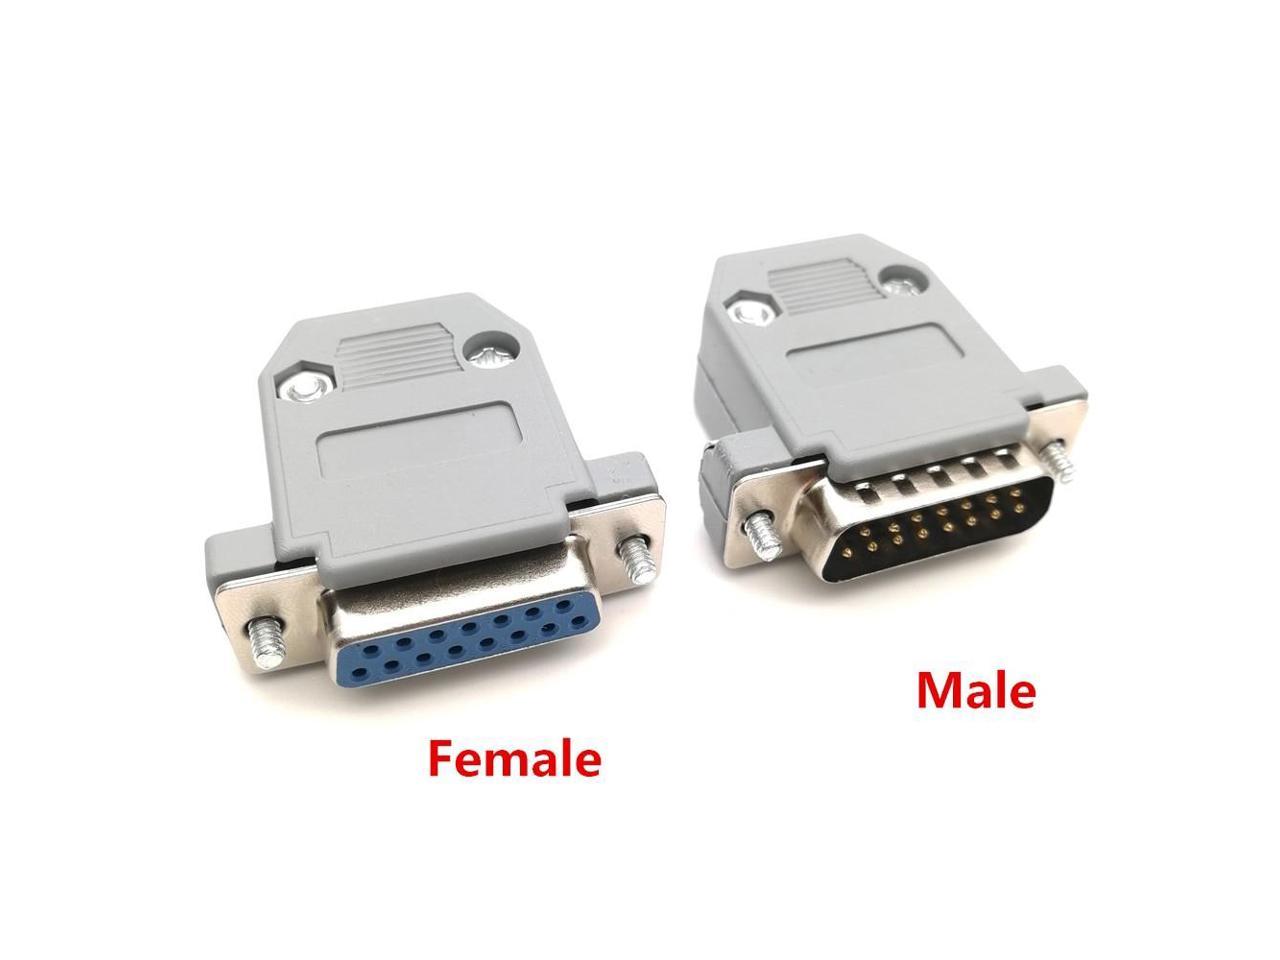 RS232 Parallel DB15 Serial Port VGA 15 Pin Male/Female Solder Connector 2 Rows D 